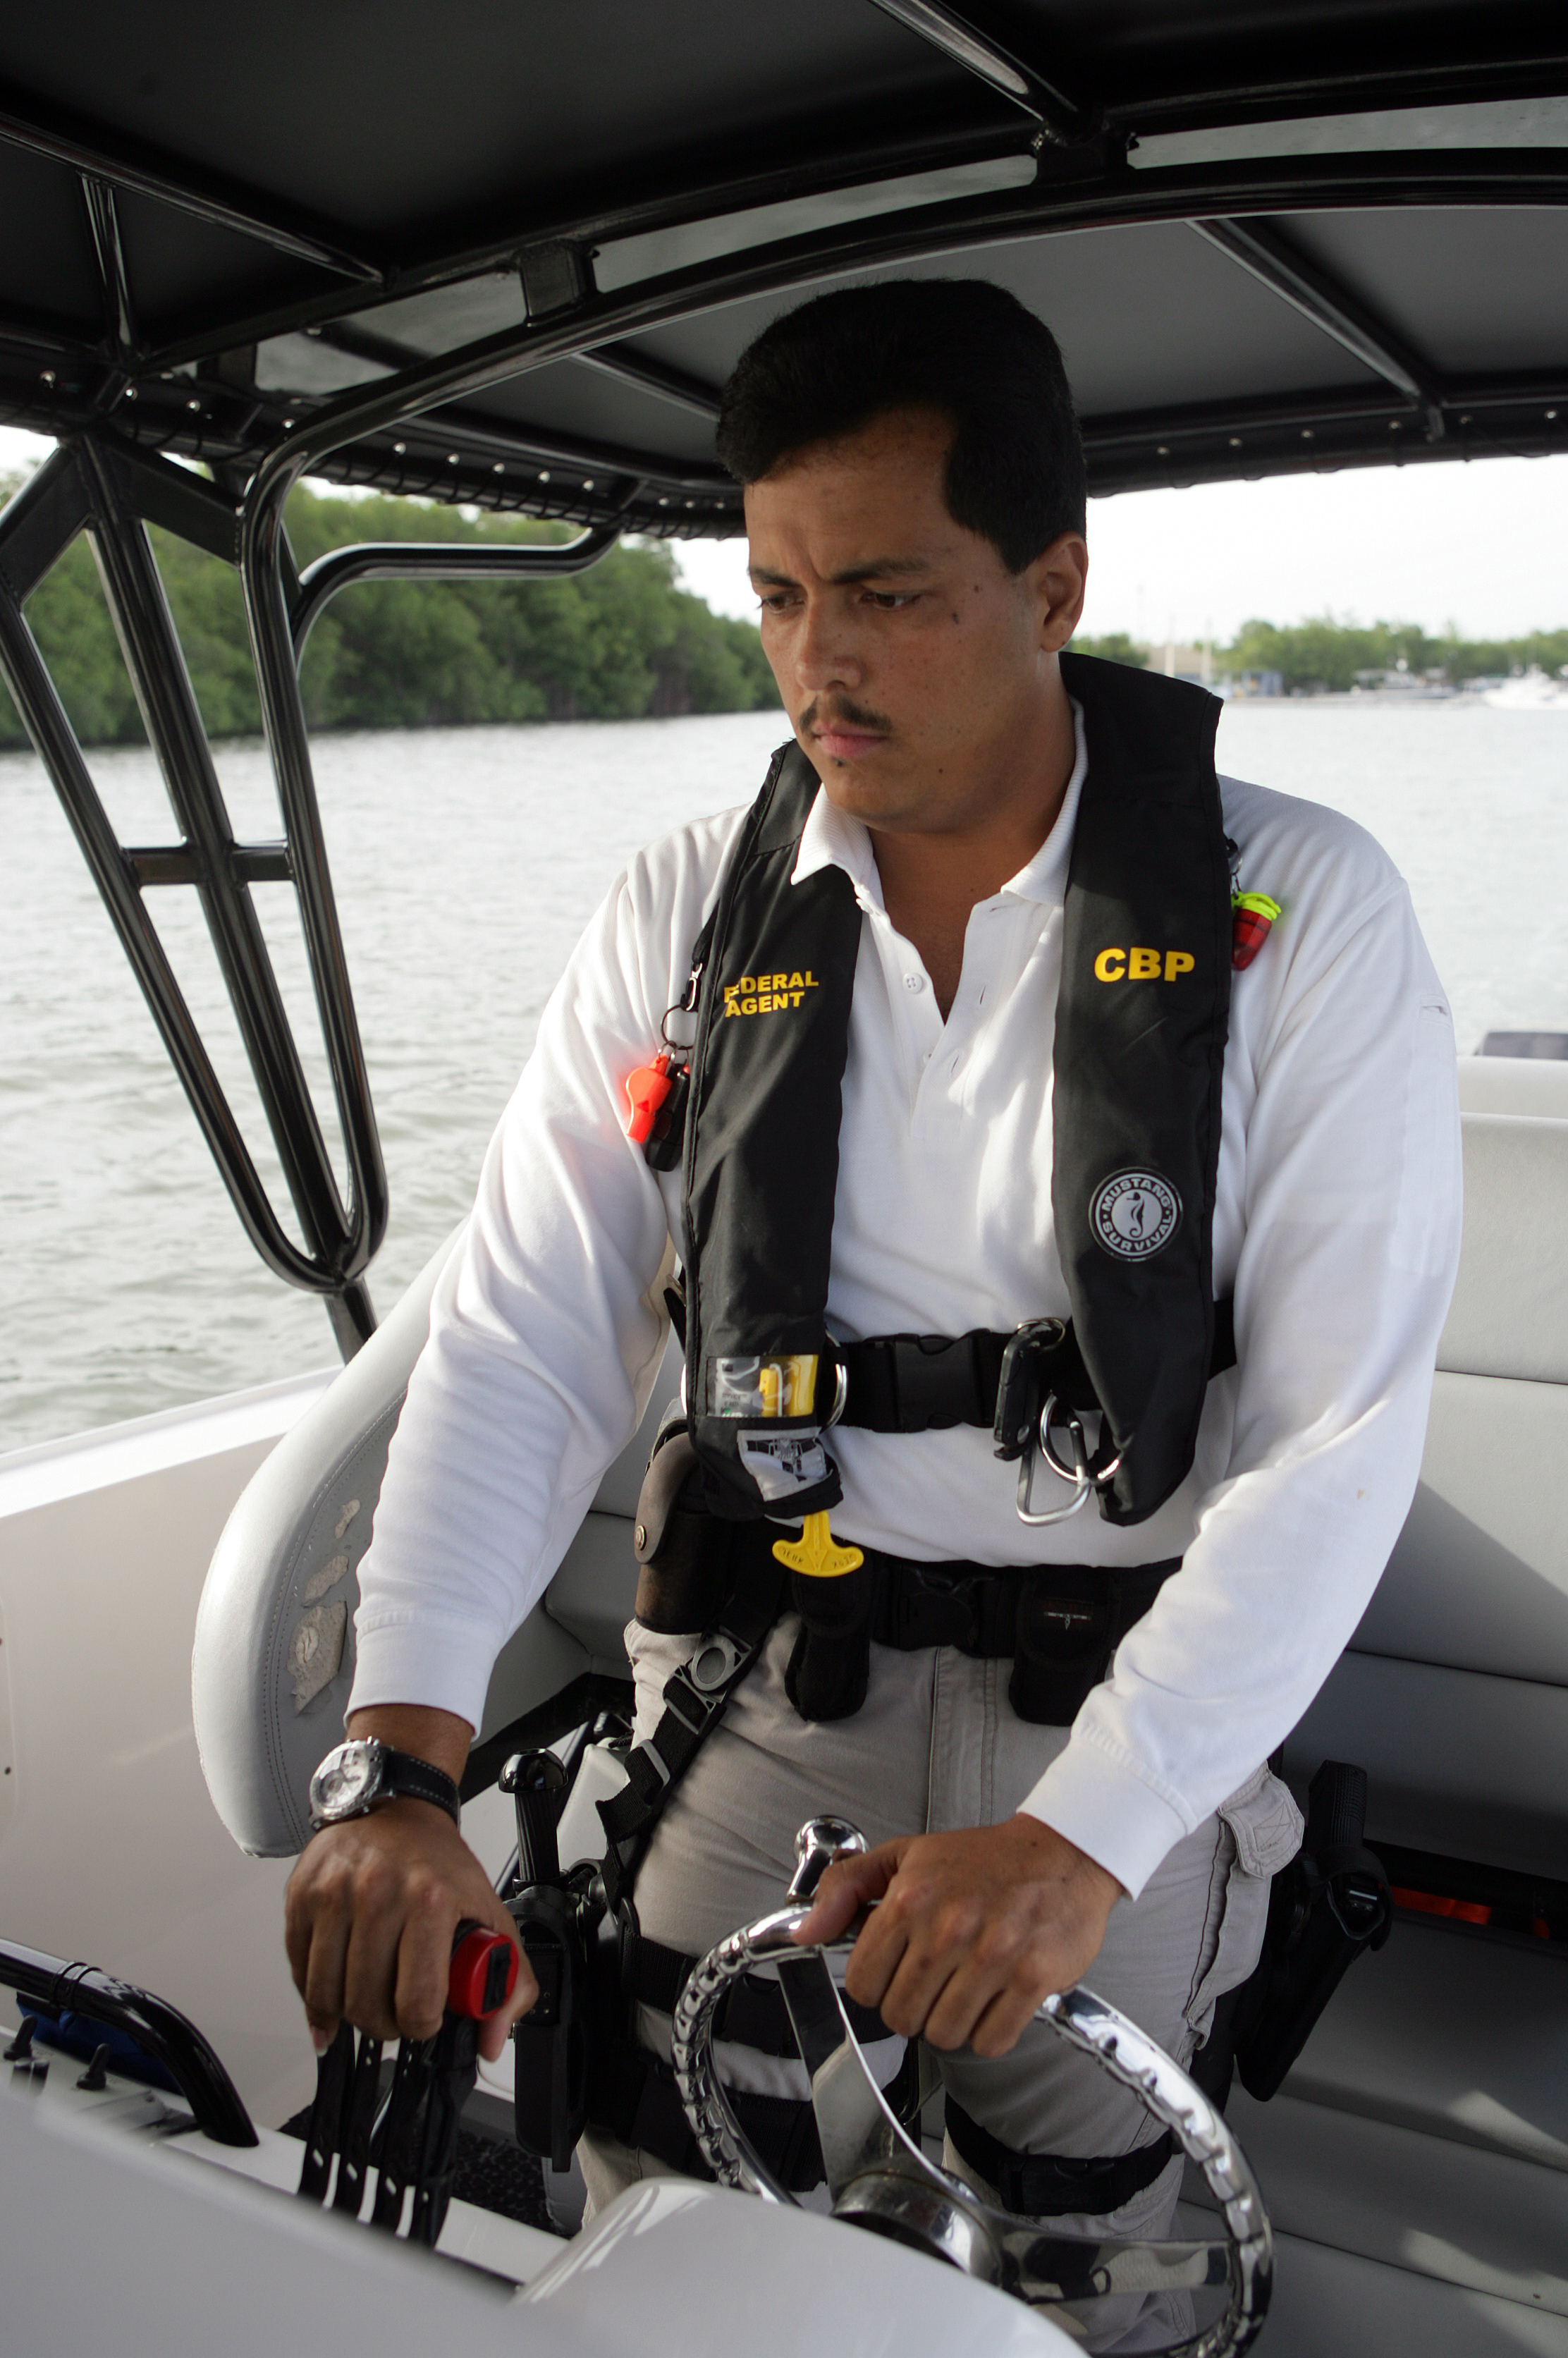 A CBP Marine officer sets off to patrol along the coast of Puerto Rico.